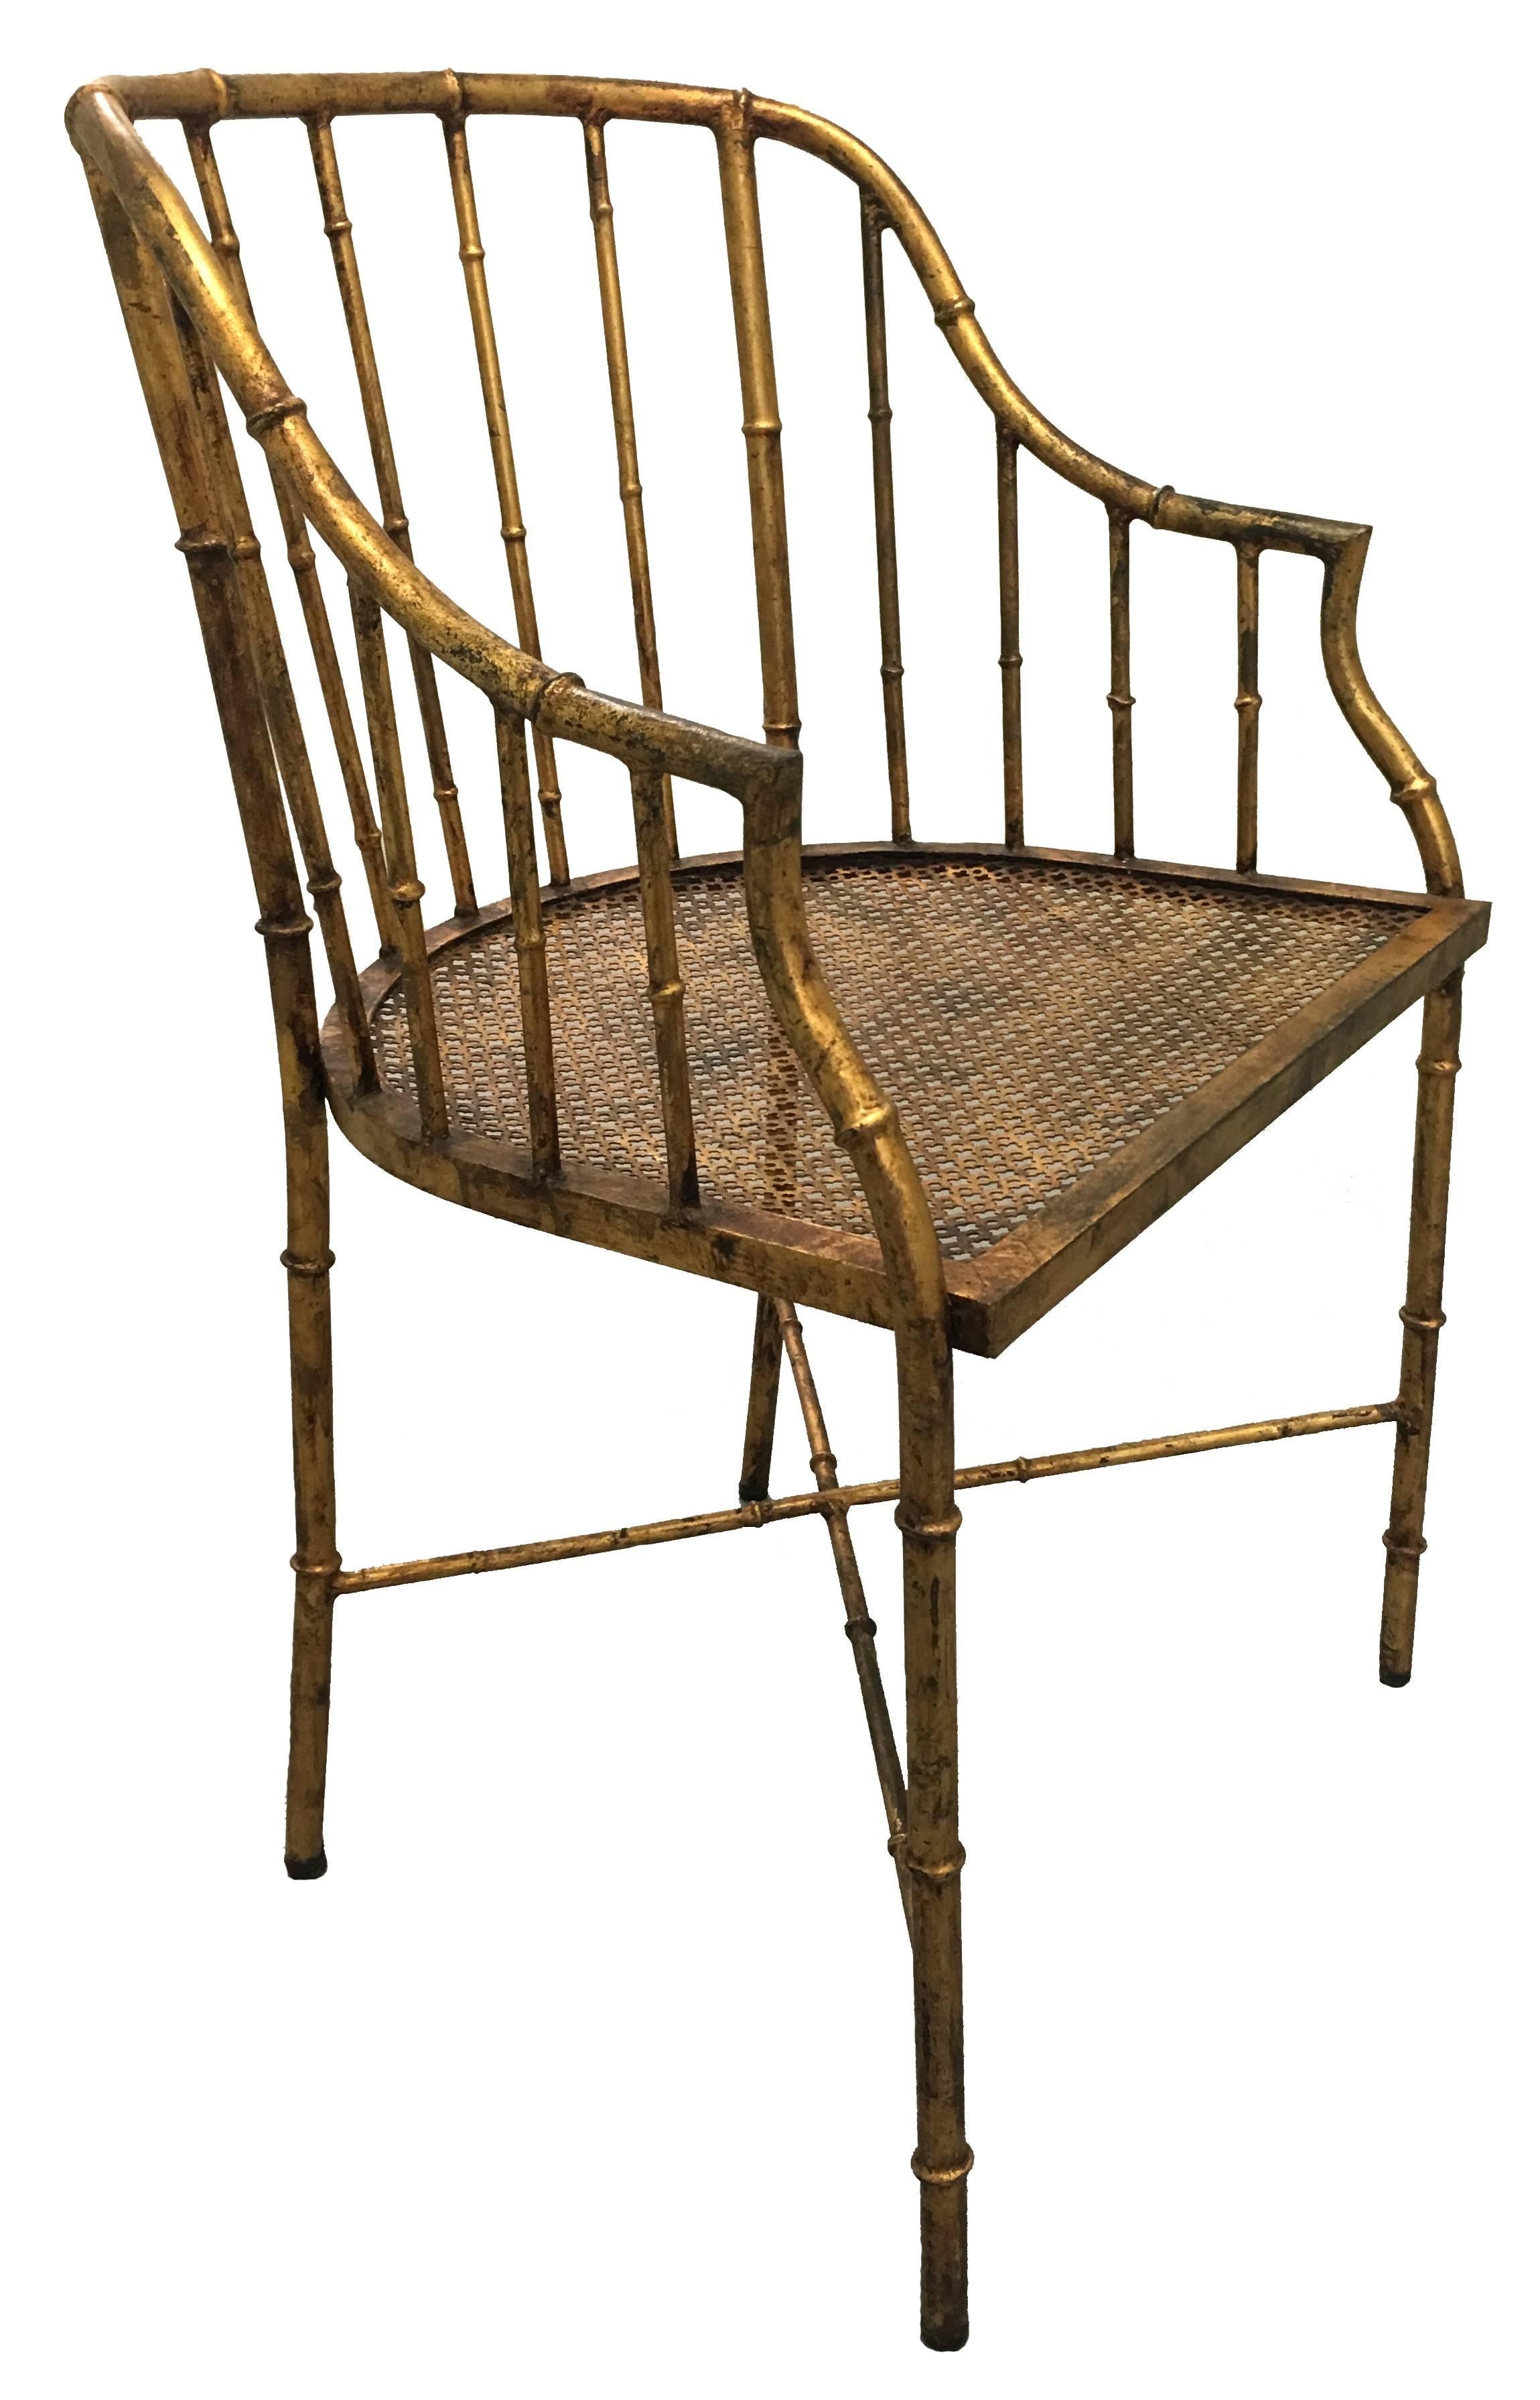 Burnished gilt metal bamboo armchair by La Barge. Seat is 17.5" H.